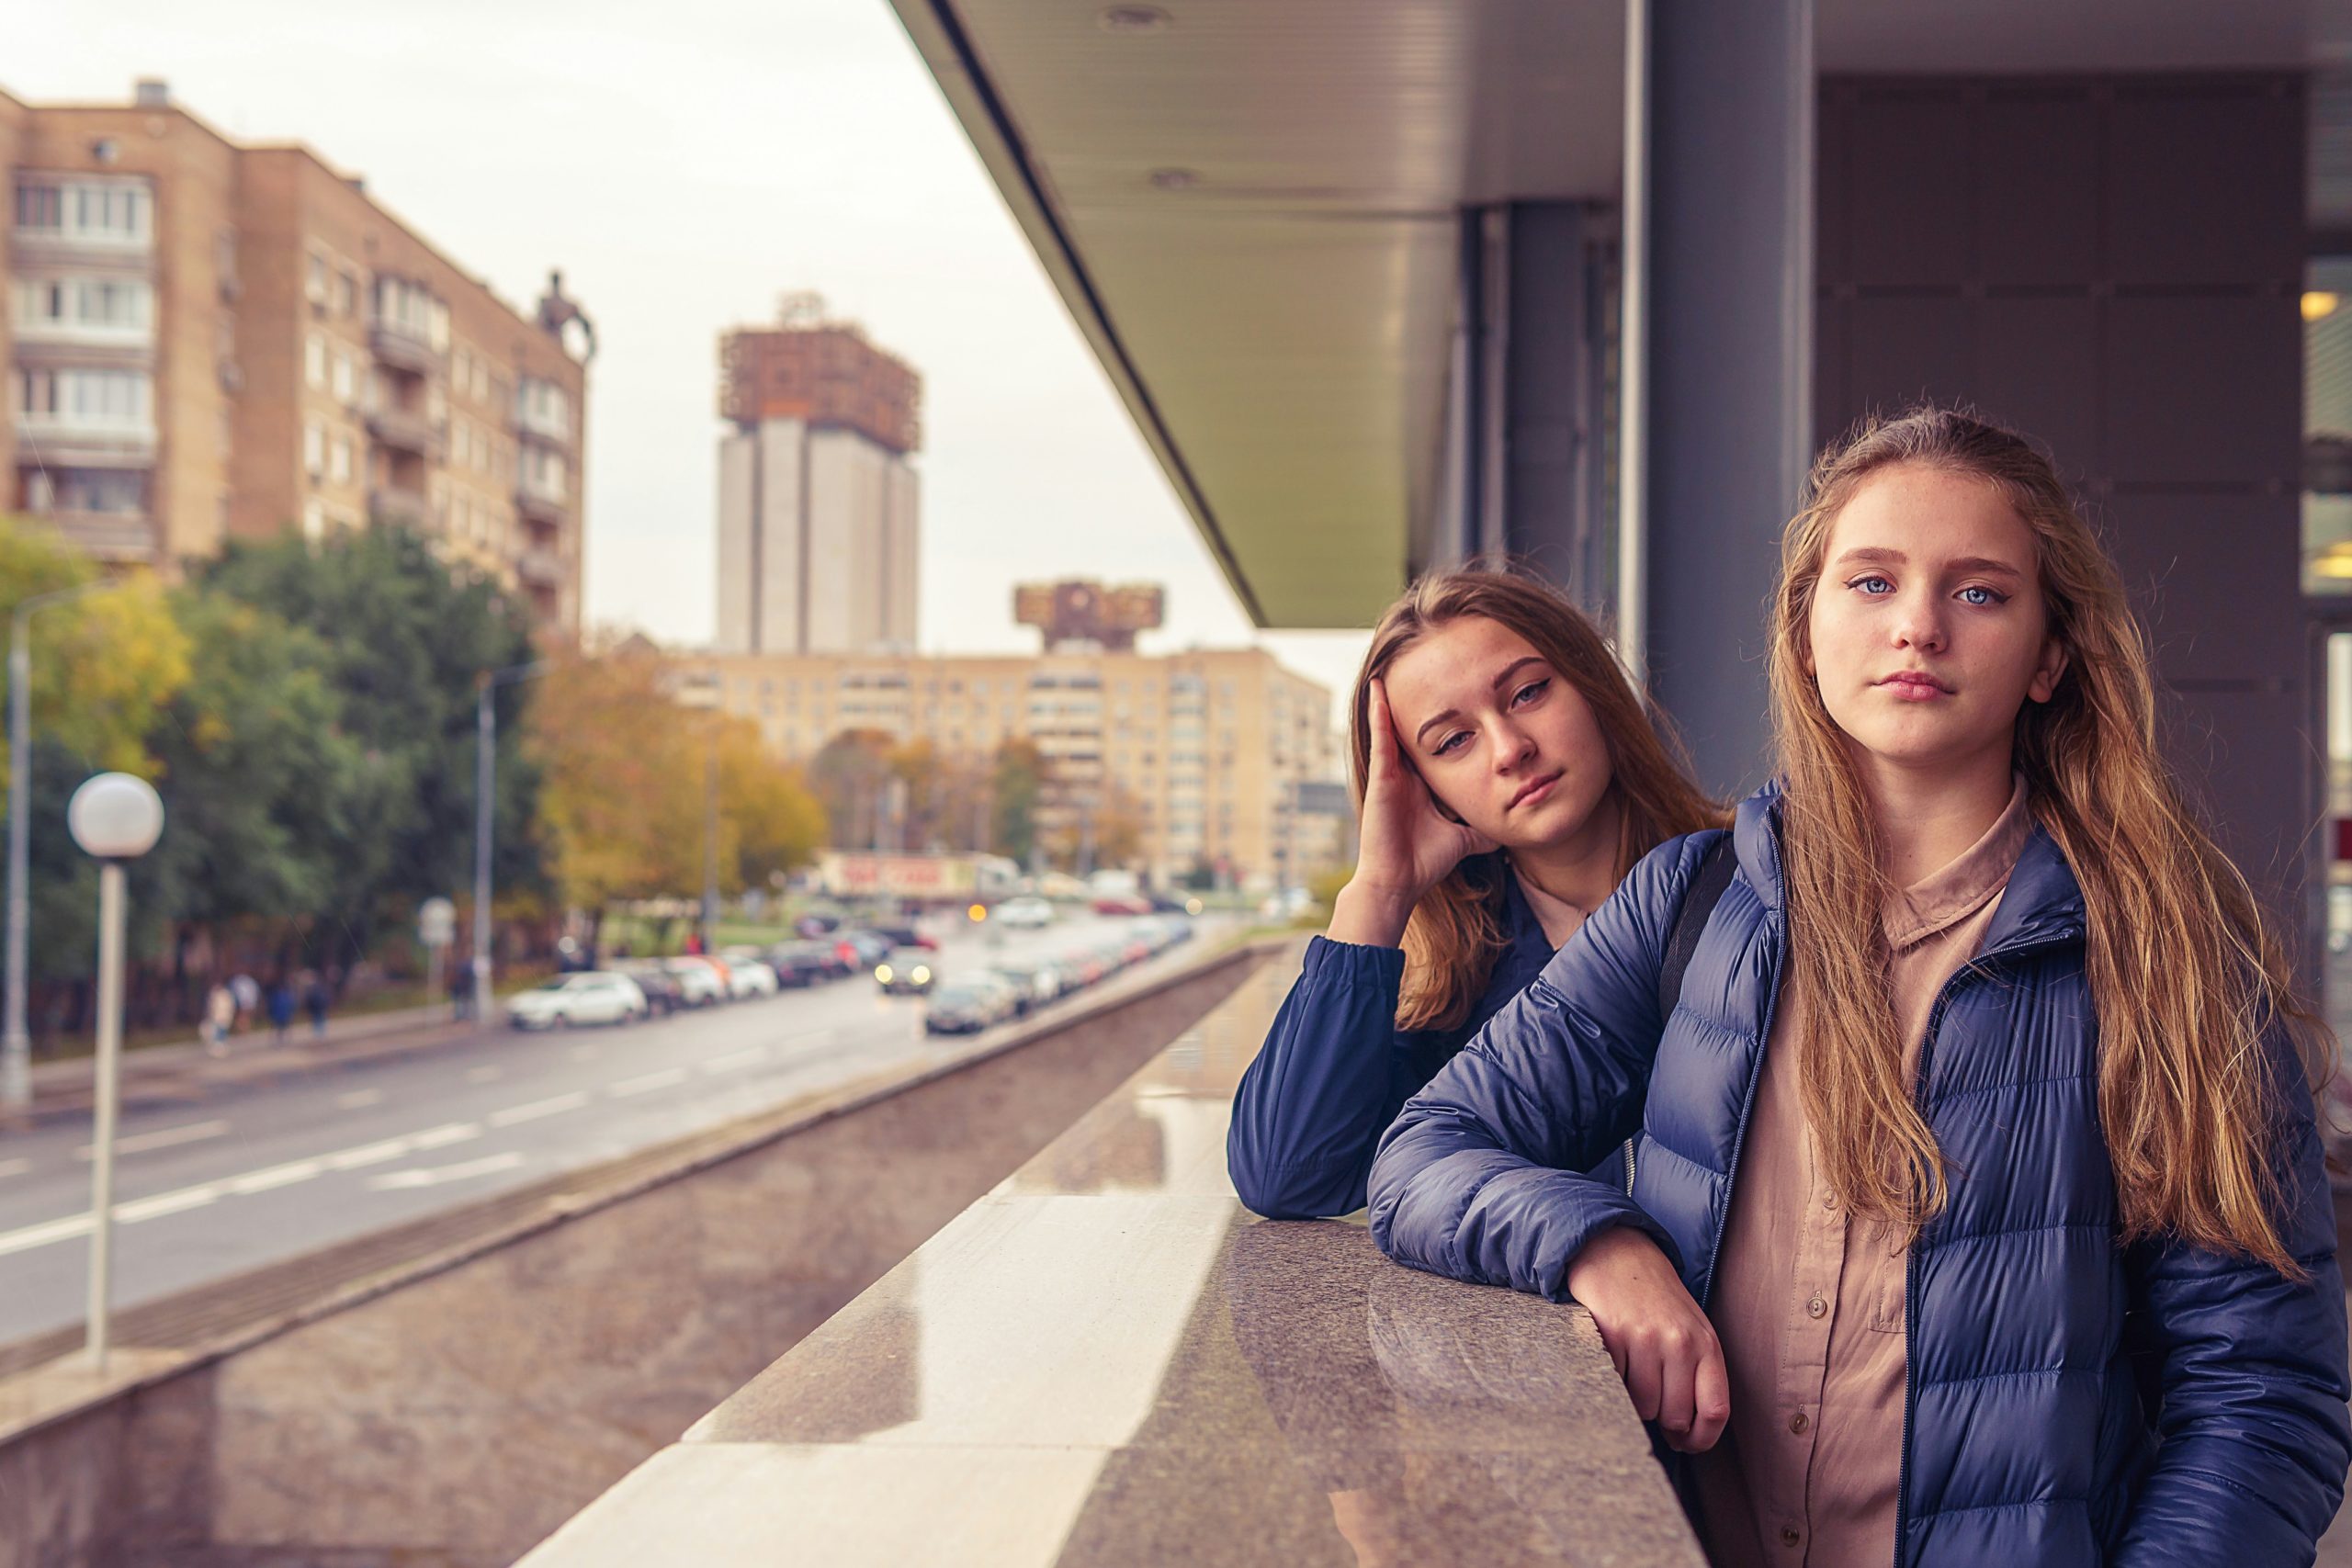 Two young women in blue jackets leaning on a railing, looking thoughtful, with a city street and buildings in the background during the evening.